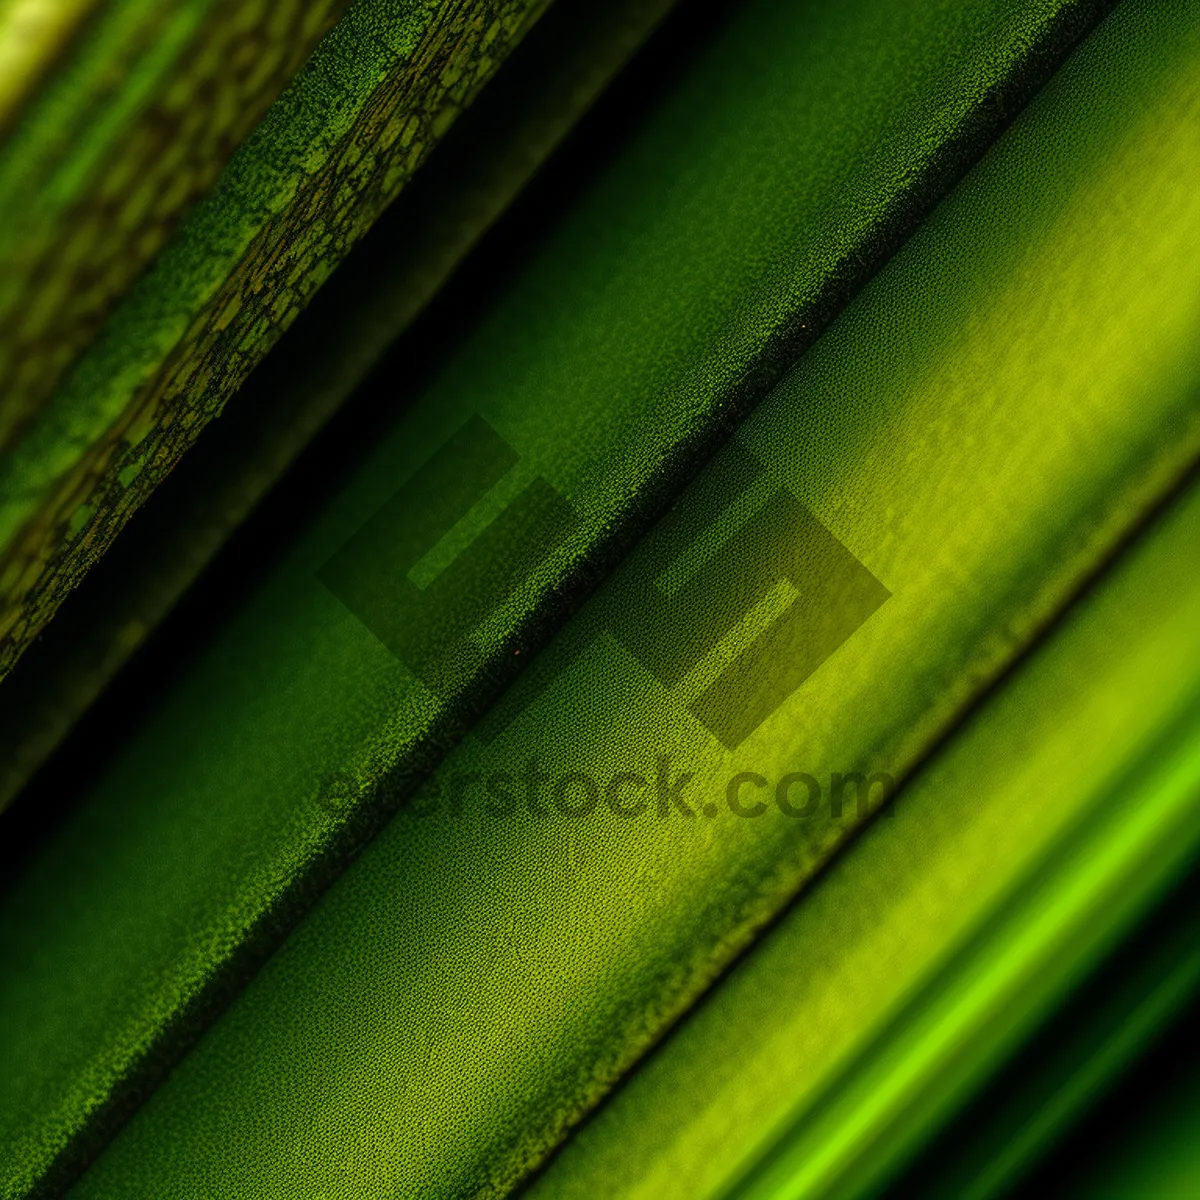 Picture of Green Lizard on Bamboo Patterned Window Shade